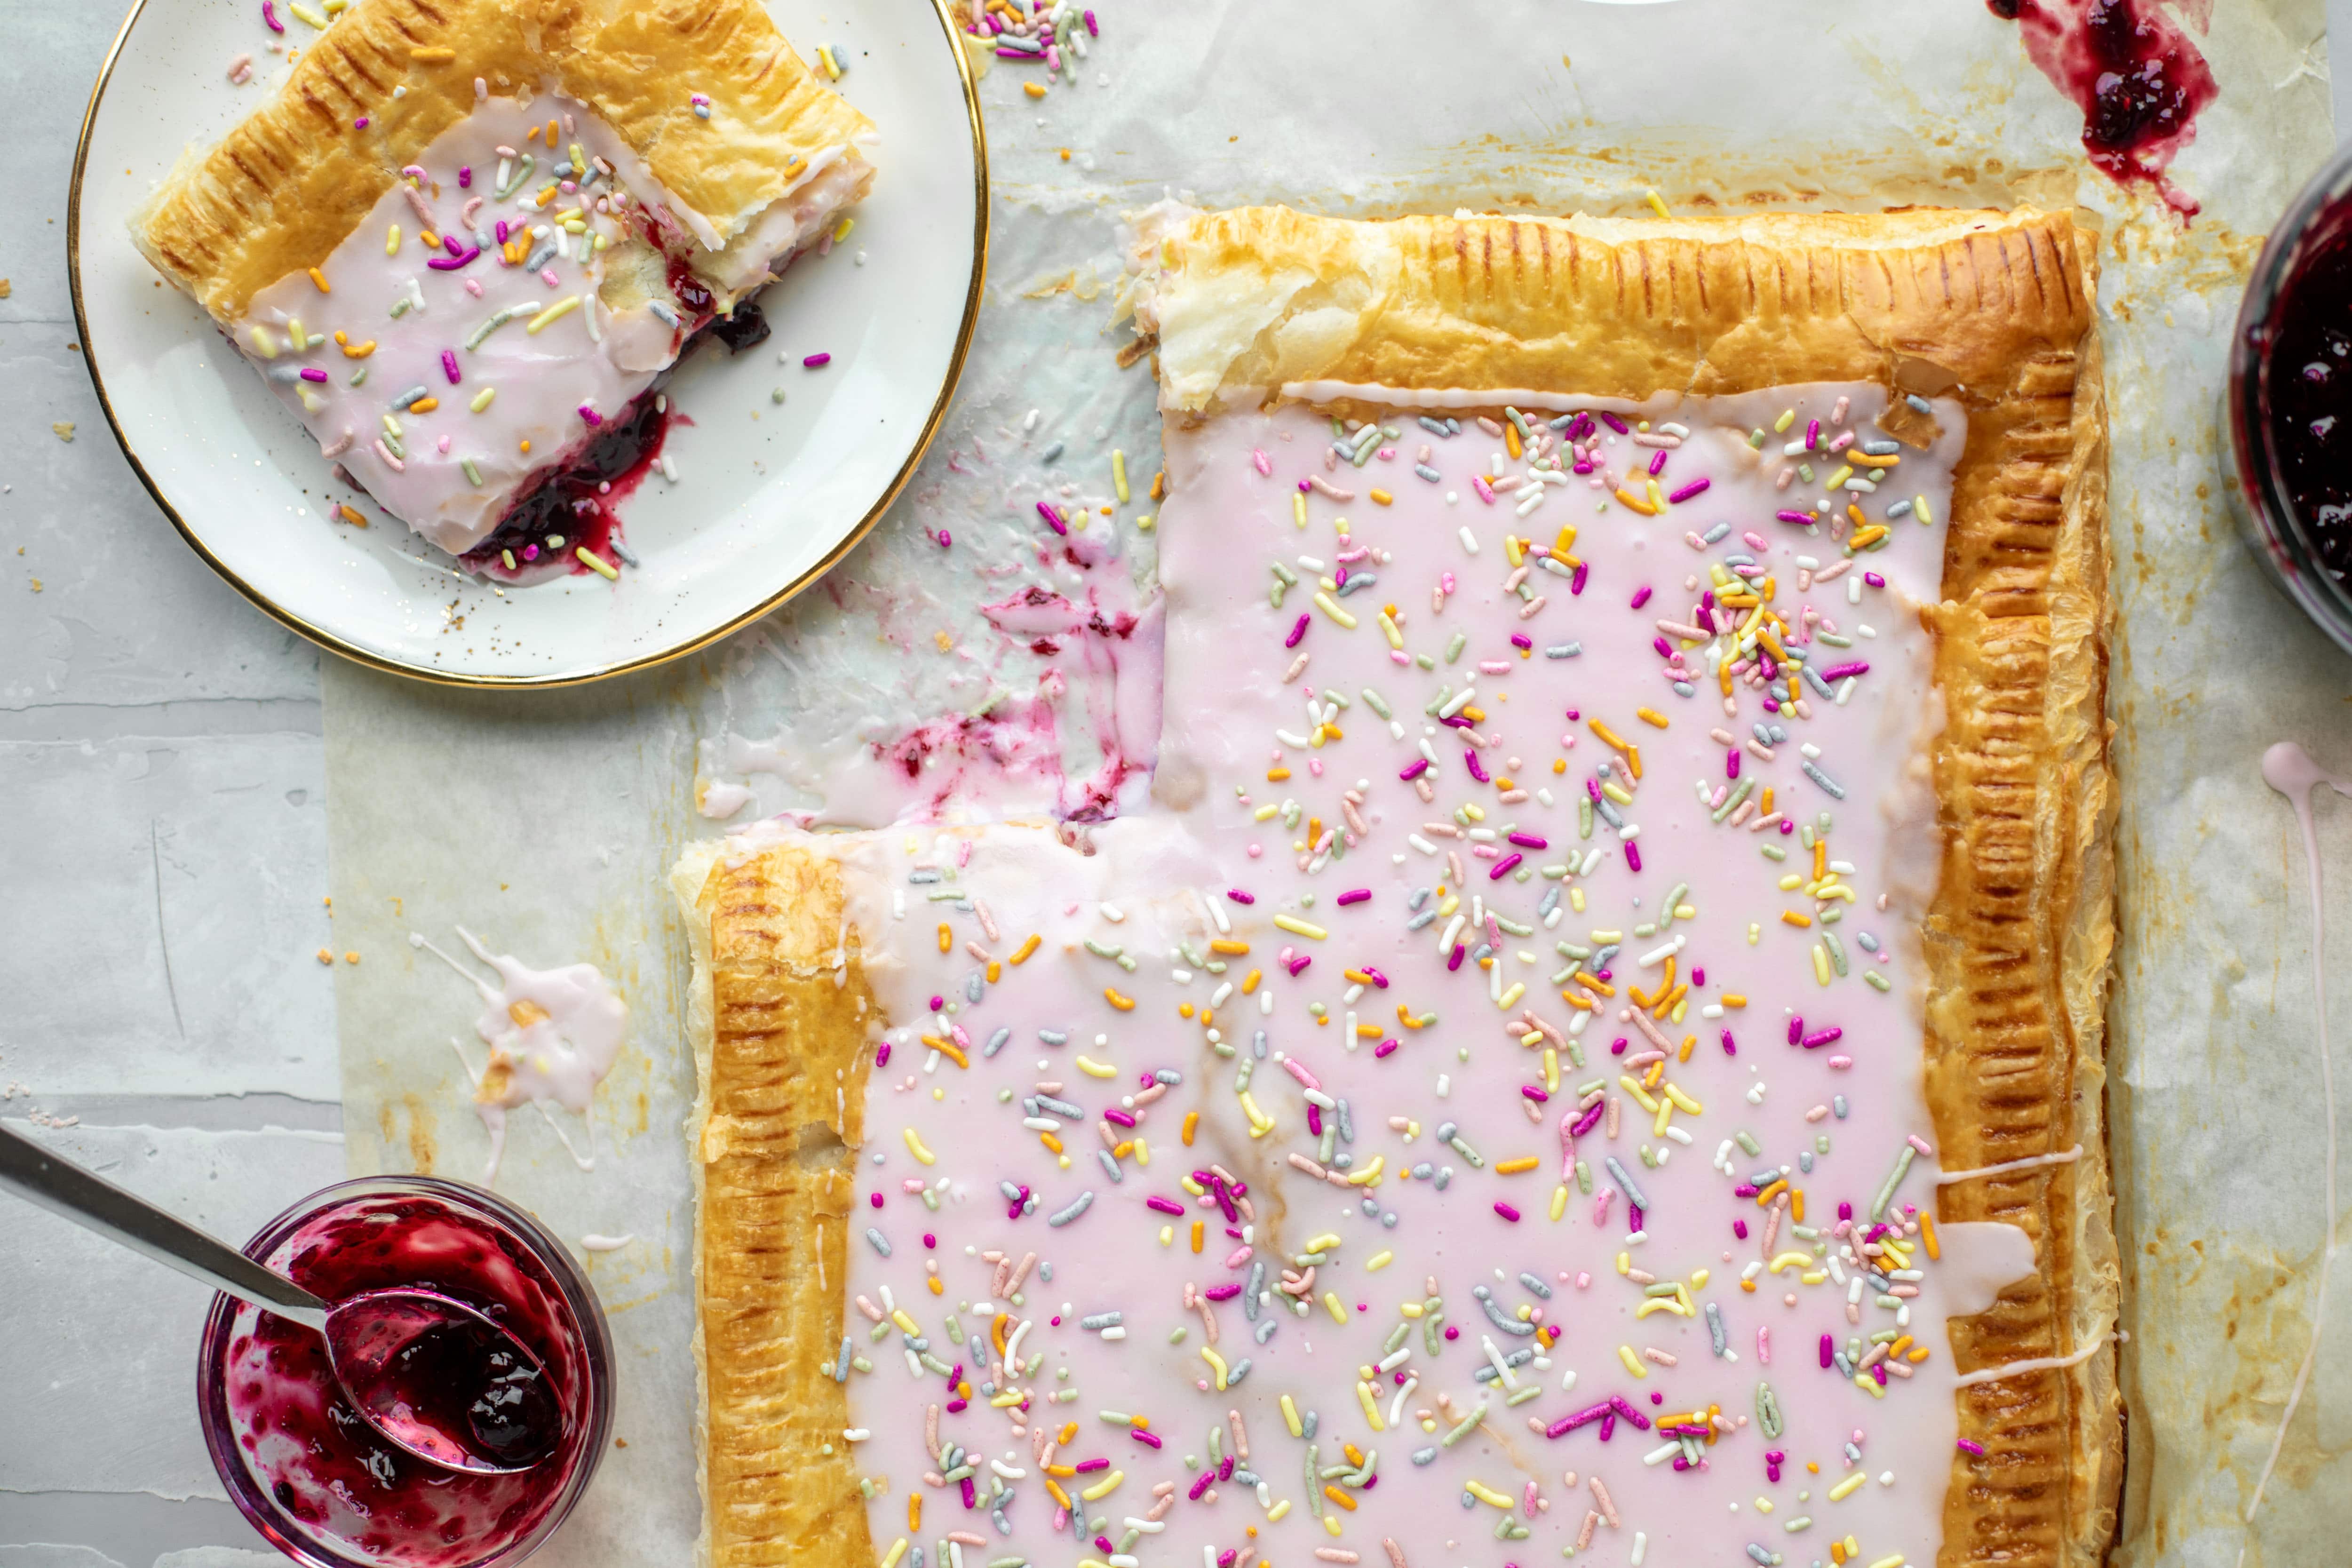 This giant pop tart recipe can be made exclusively with ingredients in your freezer! I love to make a berry lavender flavor - so perfect for spring! 